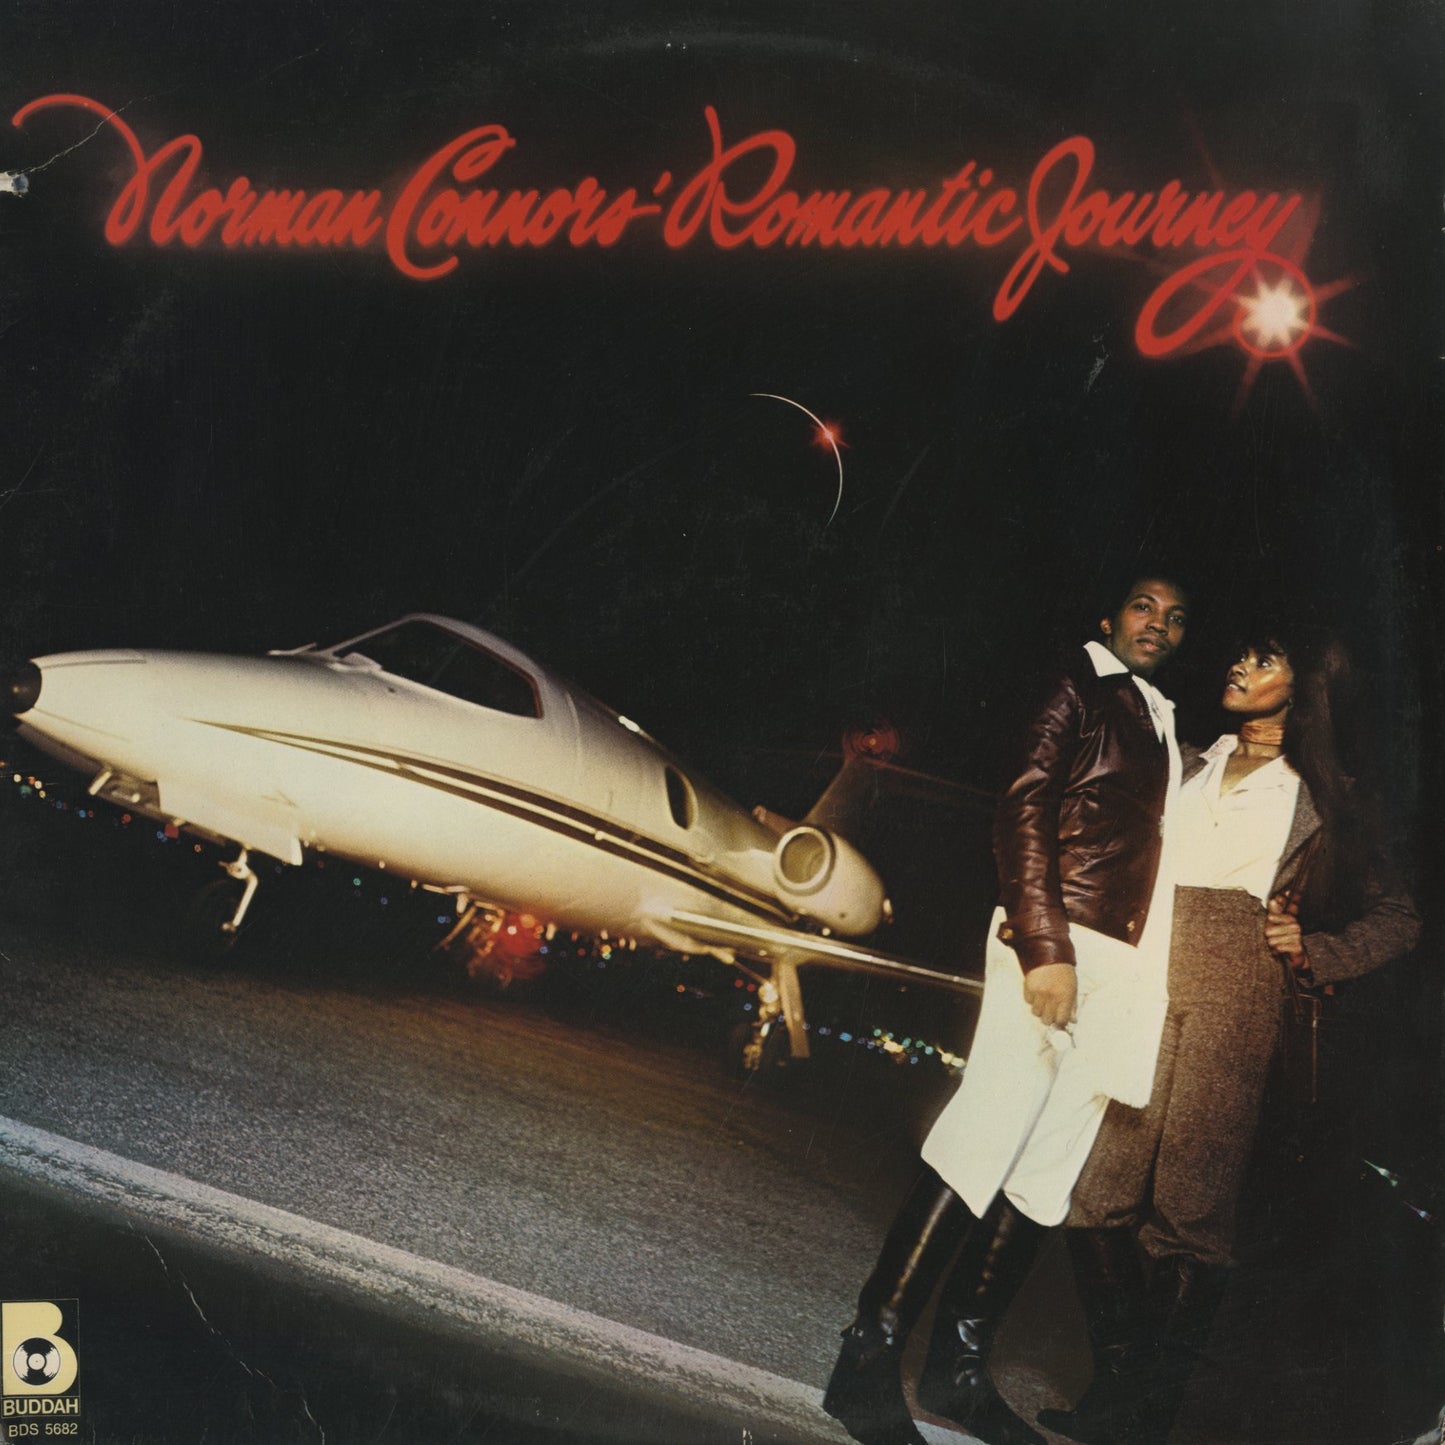 Norman Connors / ノーマン・コナーズ / Romantic Journey (BDS 5682)